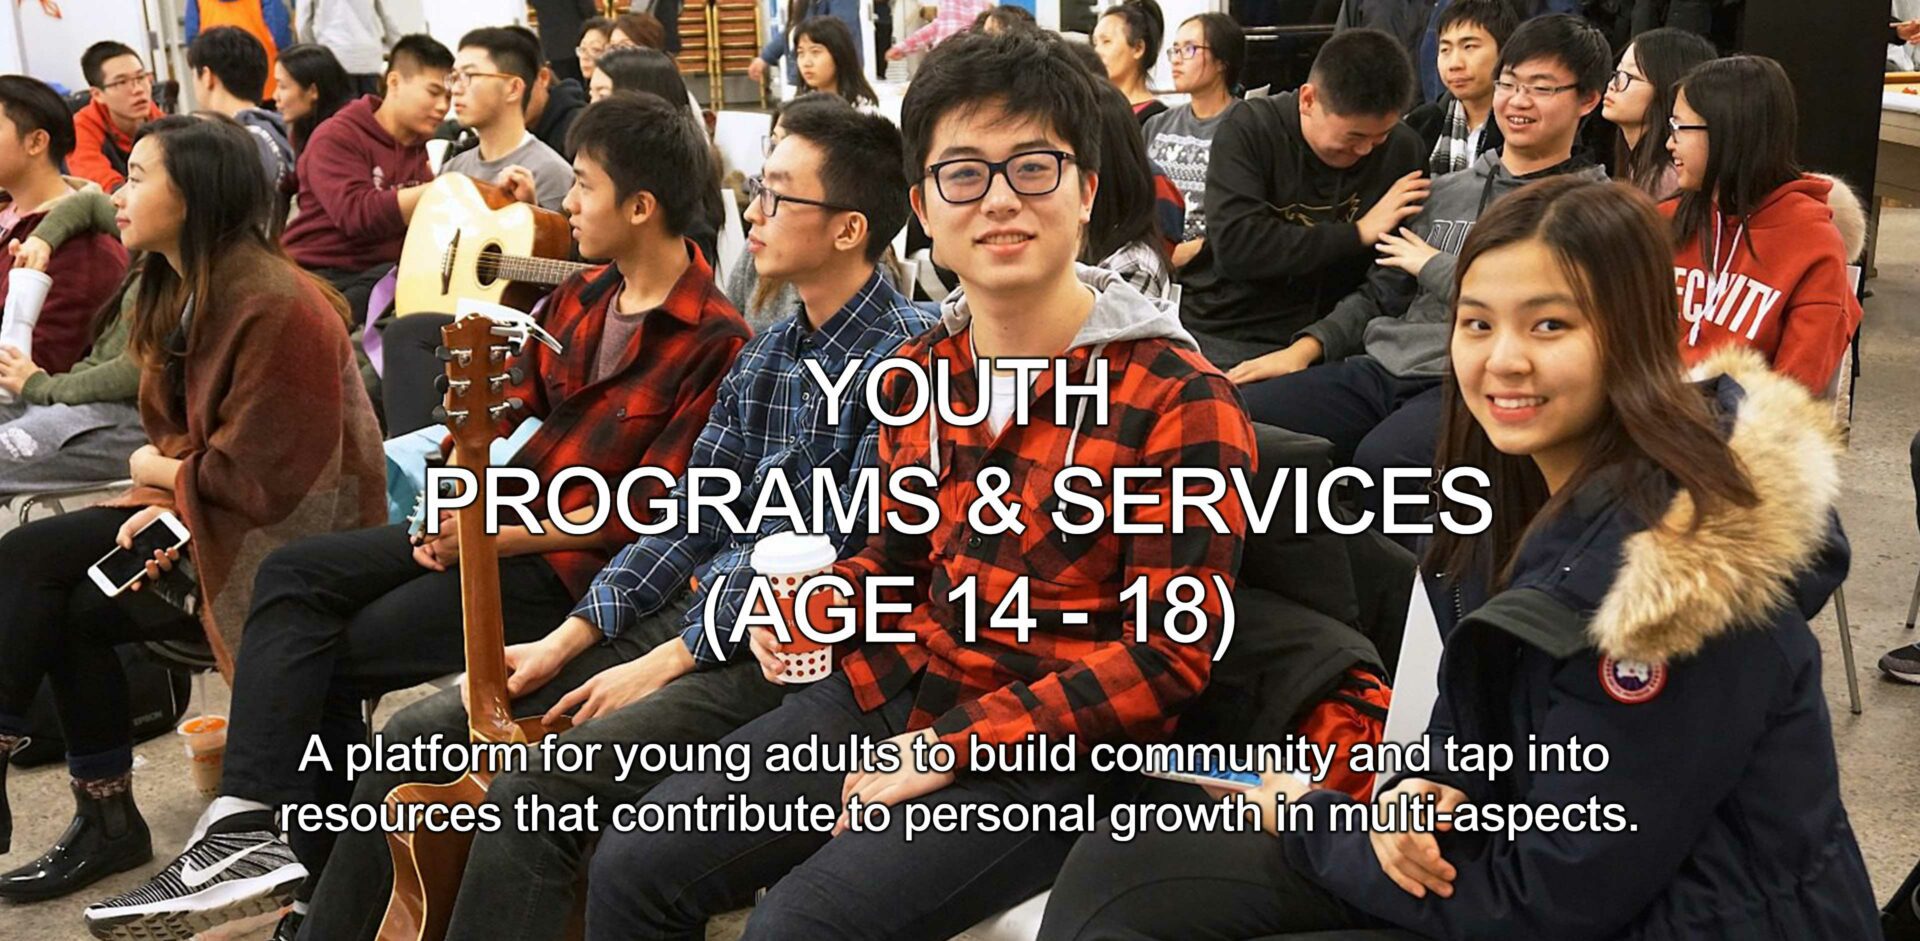 YOUTH PROGRAMS & SERVICES (AGE 14 - 18)